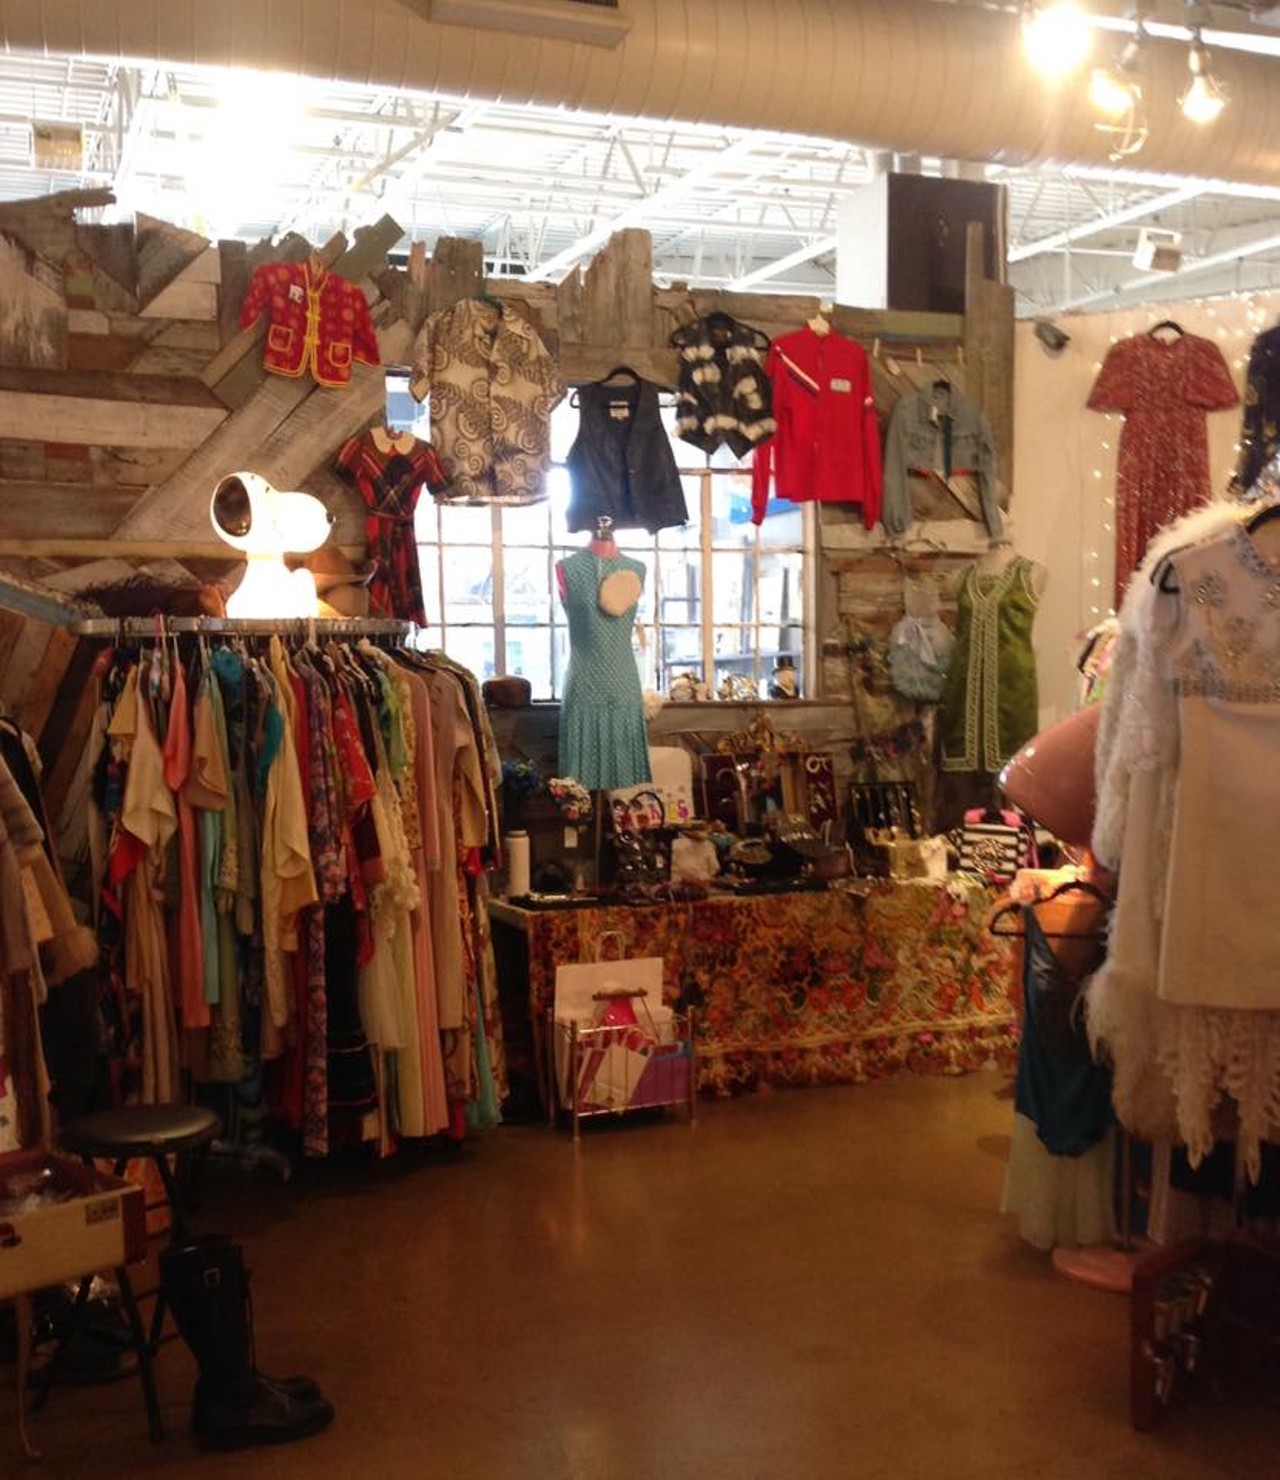 Leah&#146;s Closet
722 W Eleven Mile Road Royal Oak 
A mixture of new and vintage clothing and accessories. The store even has an online Ebay component that features designer gowns and clothing pieces. From Moschino to vintage Claire Pearone this store has it all.
(Photo courtesy of Leah&#146;s Closet&#146;s Facebook)